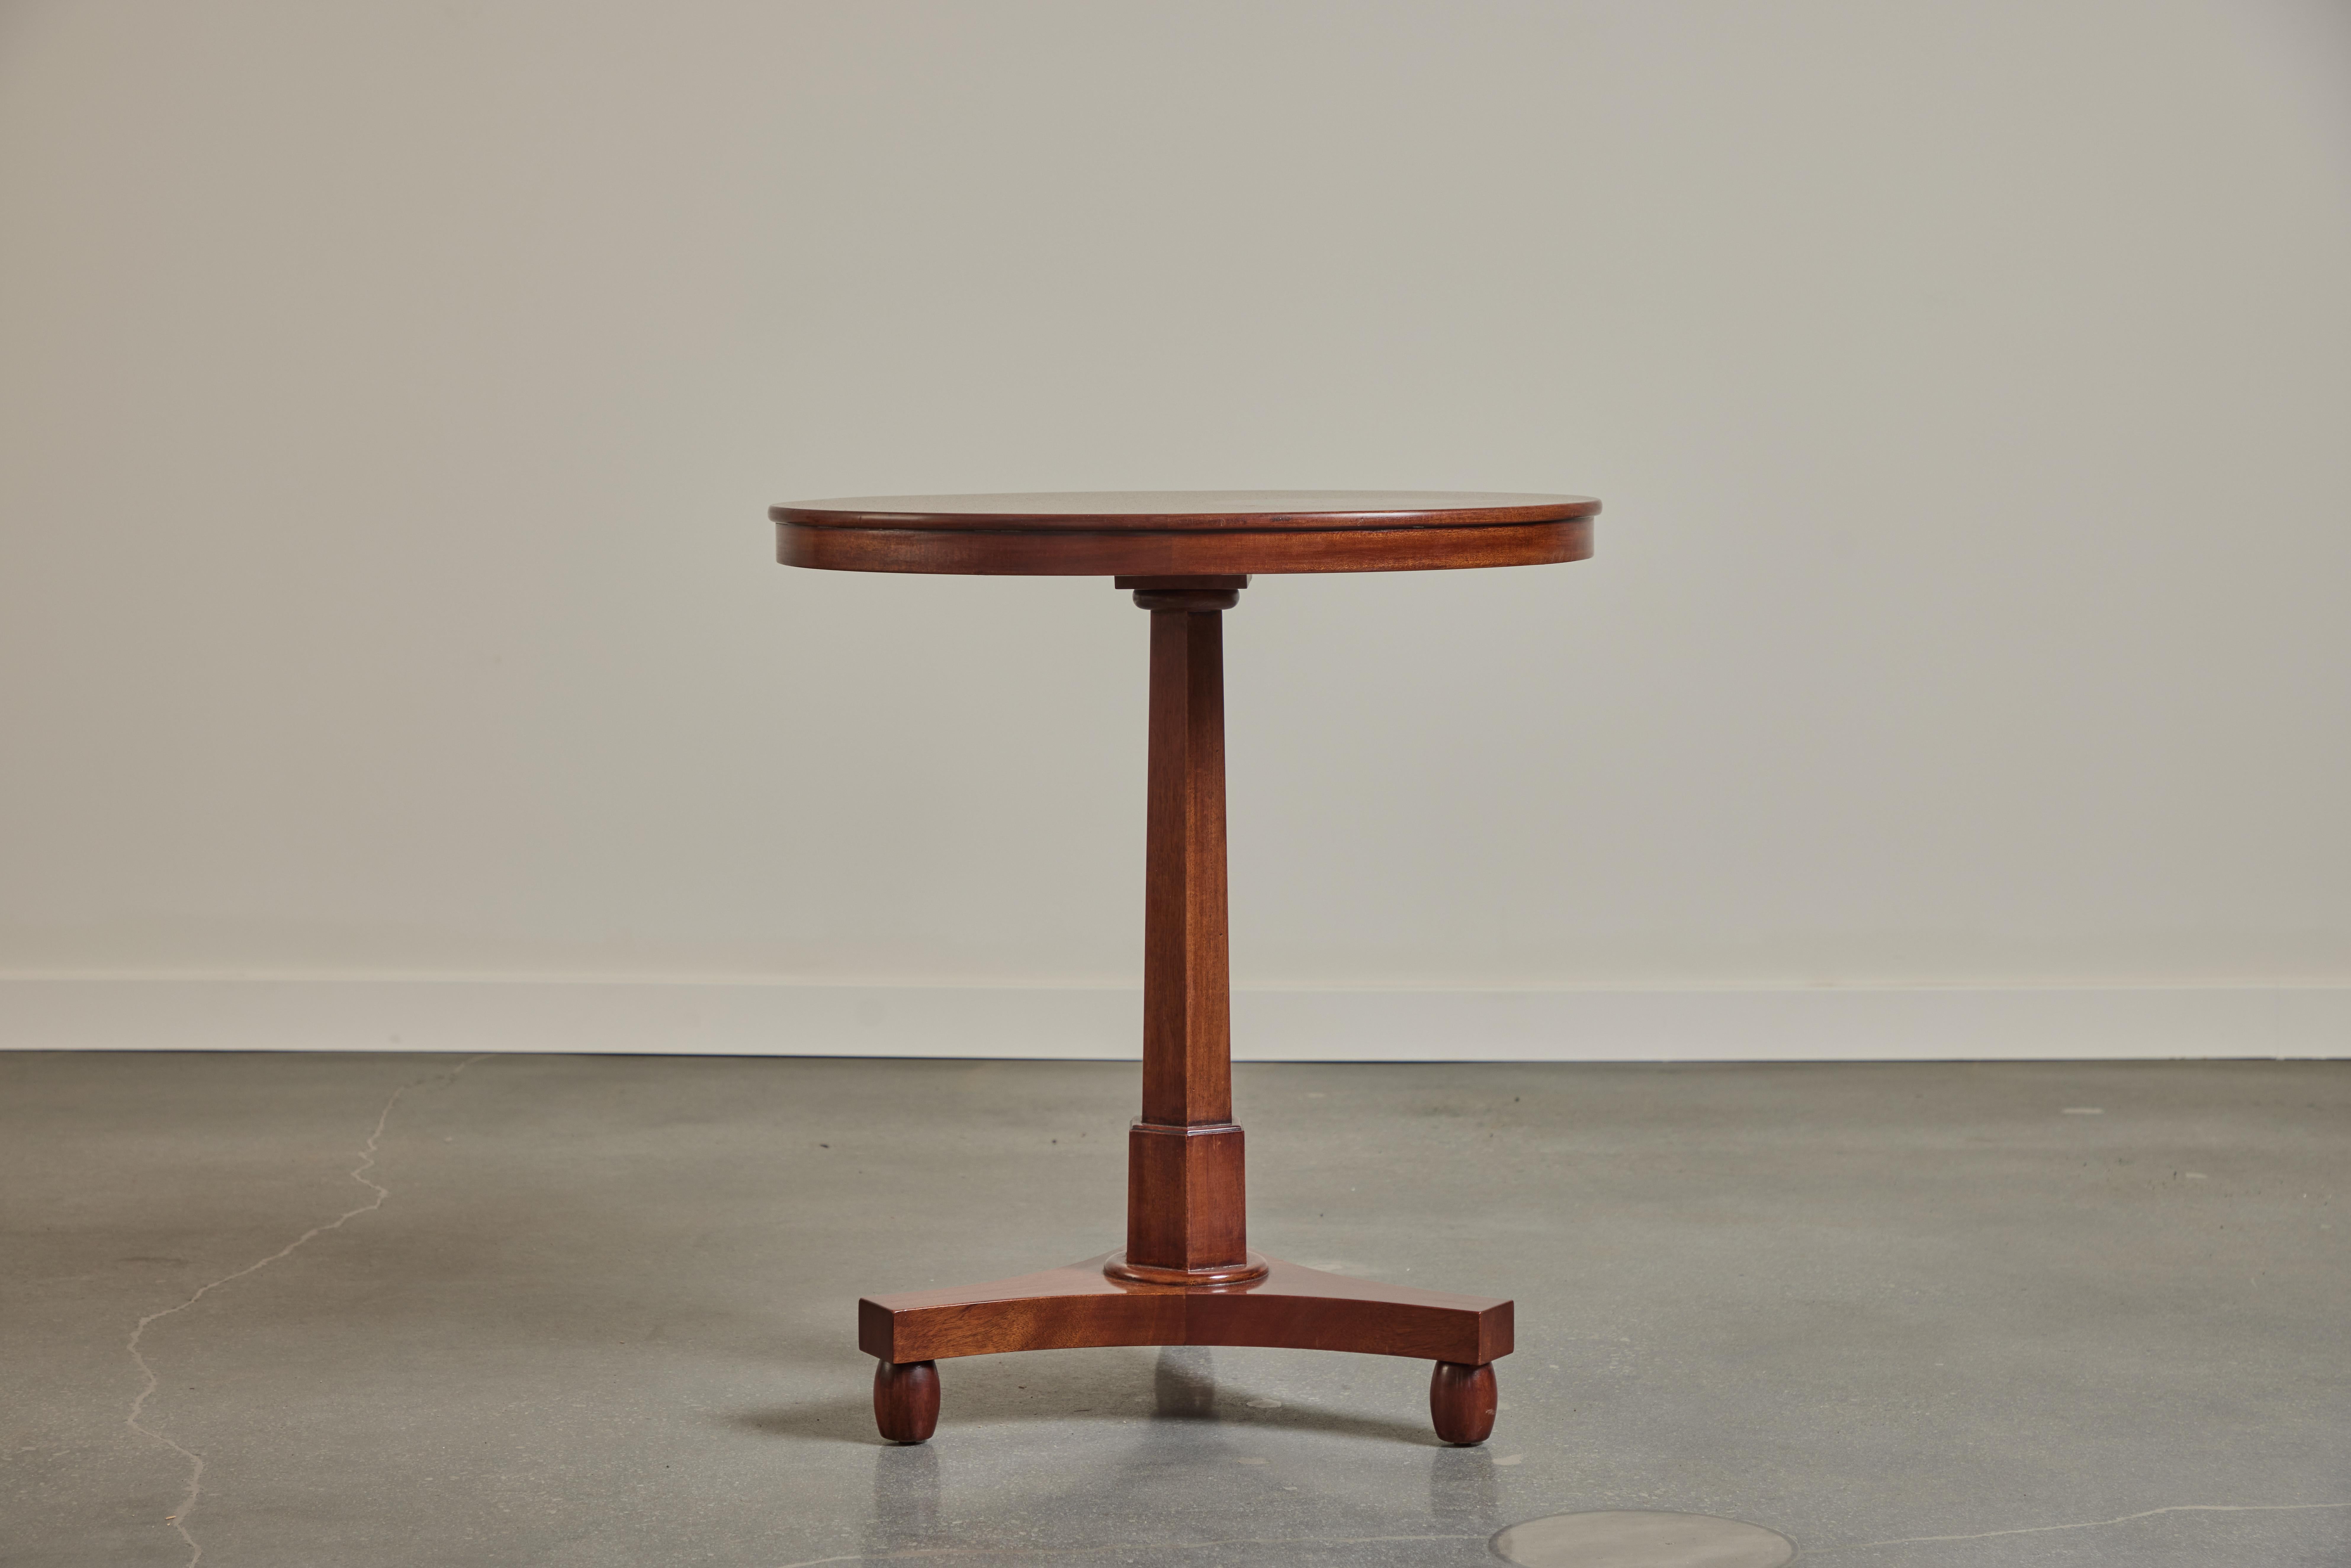 We make this Empire style side table to order from African Mahogany in our Los Angeles workshops.  We offer a durable lacquer finish or a traditional french polish. We can distress to give a more relaxed feeling or match color and finish to your